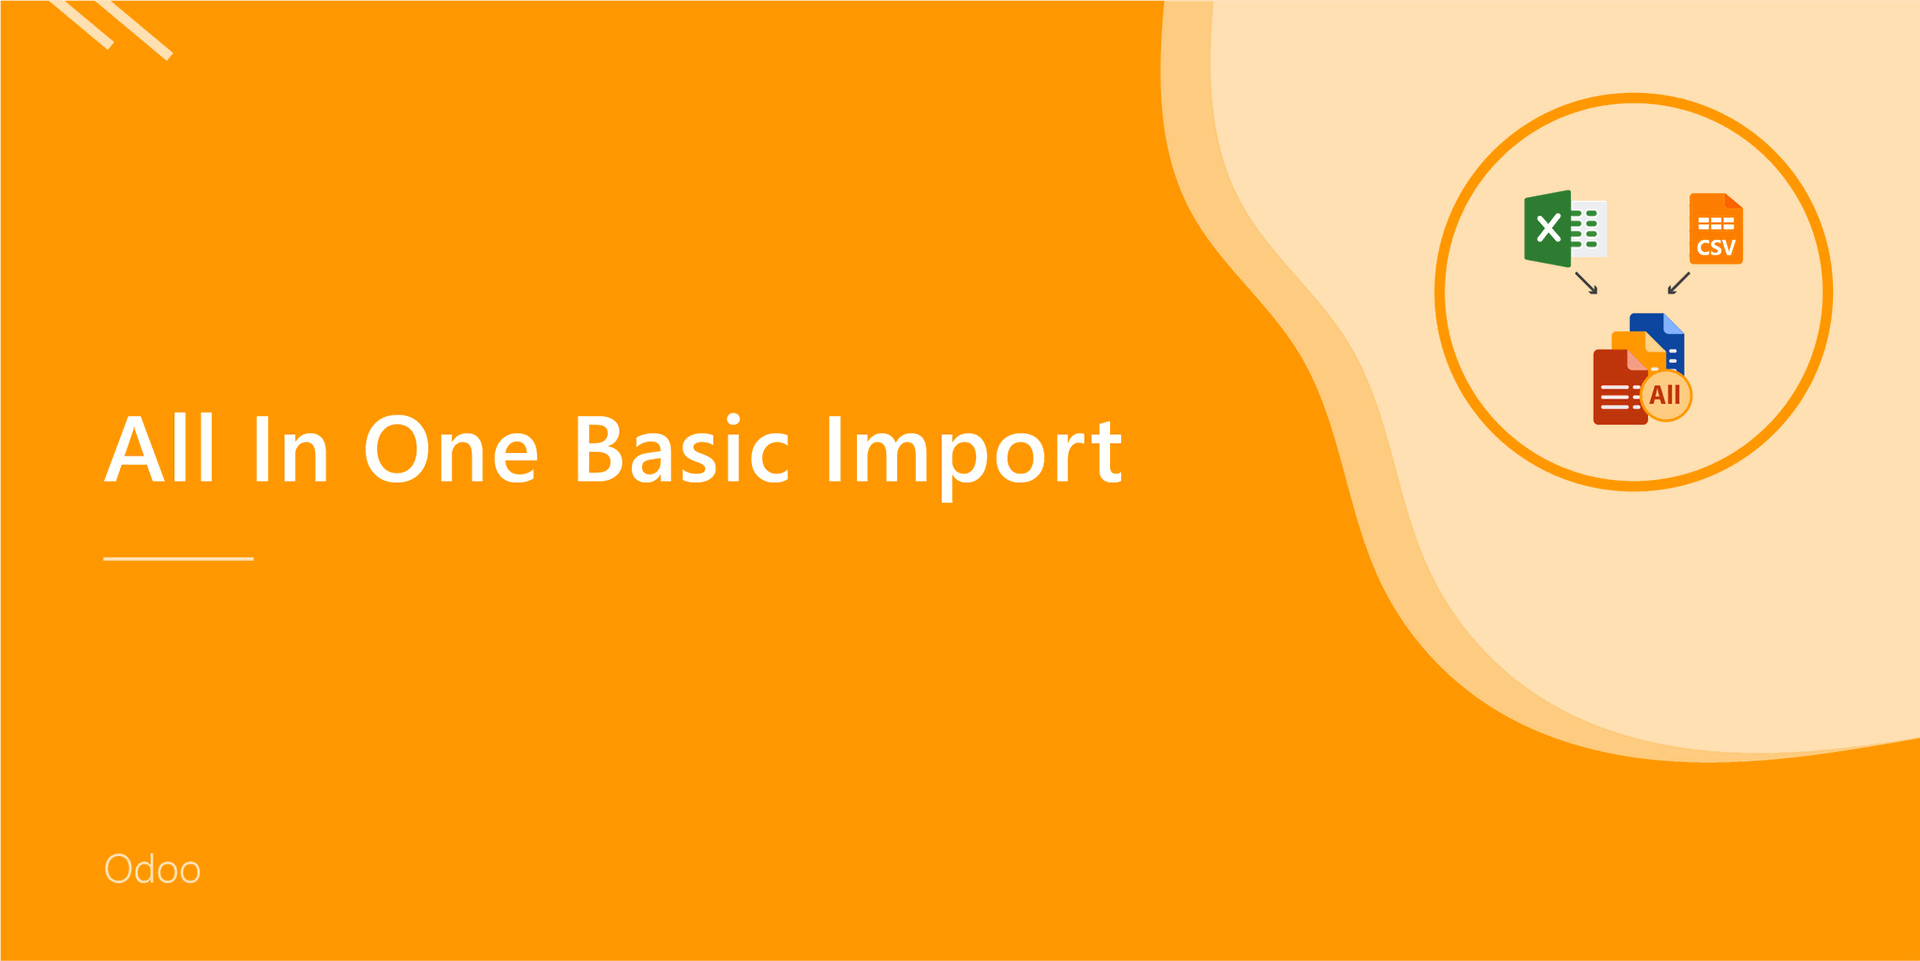 All In One Basic Import